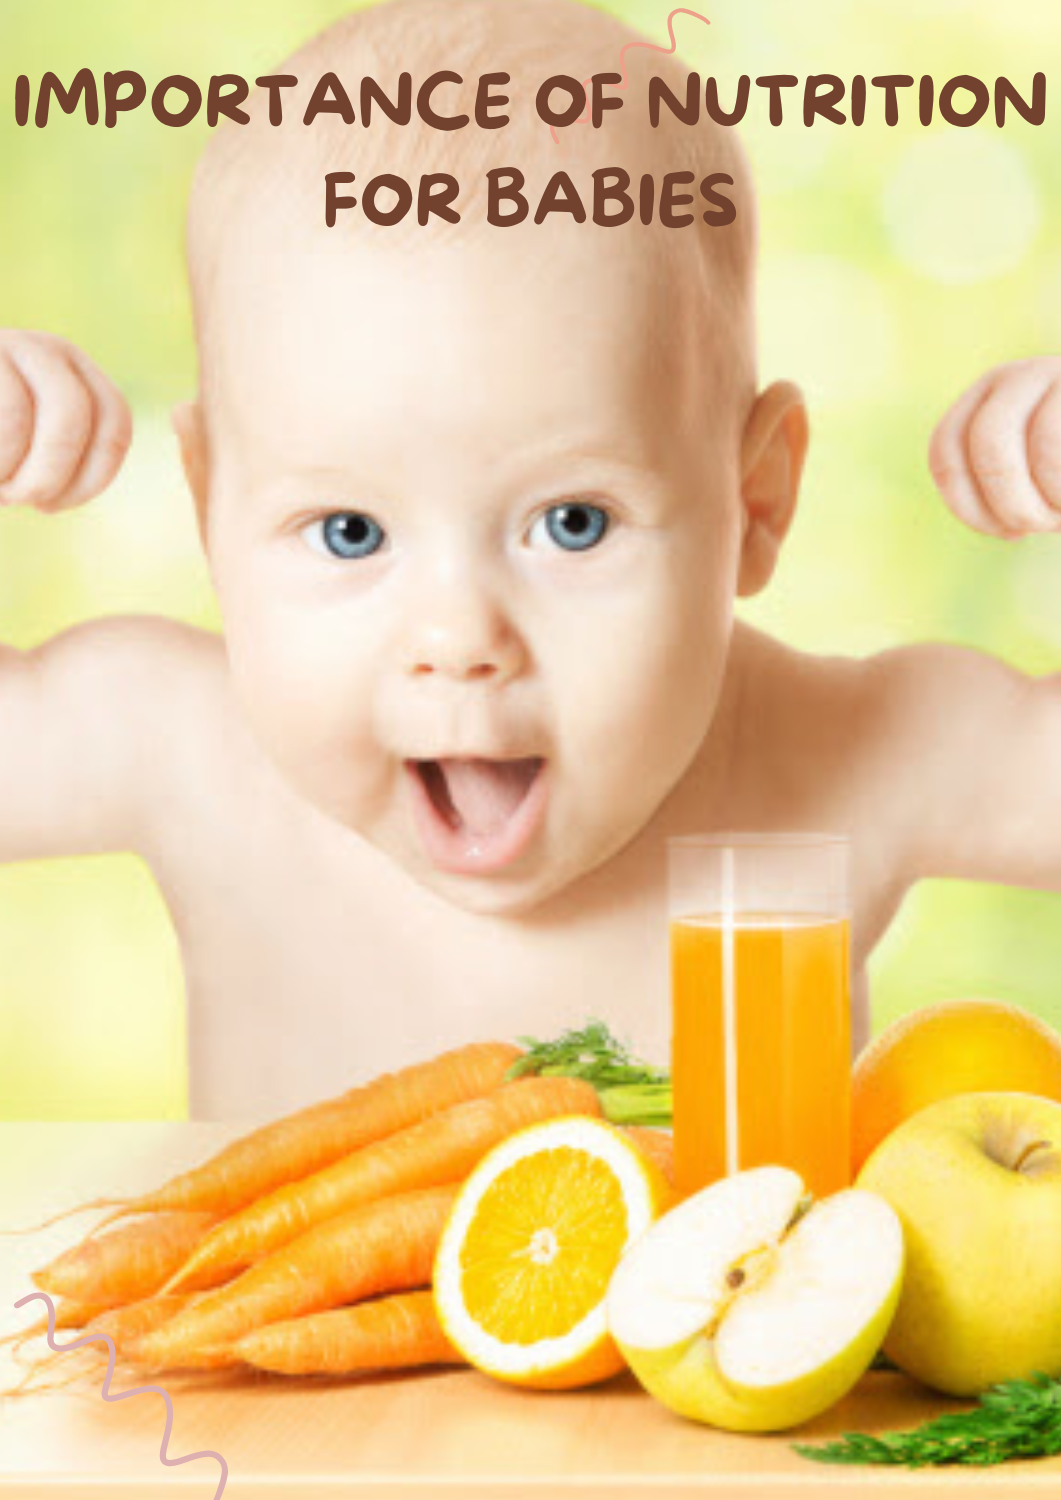 Importance of Nutrition for Babies